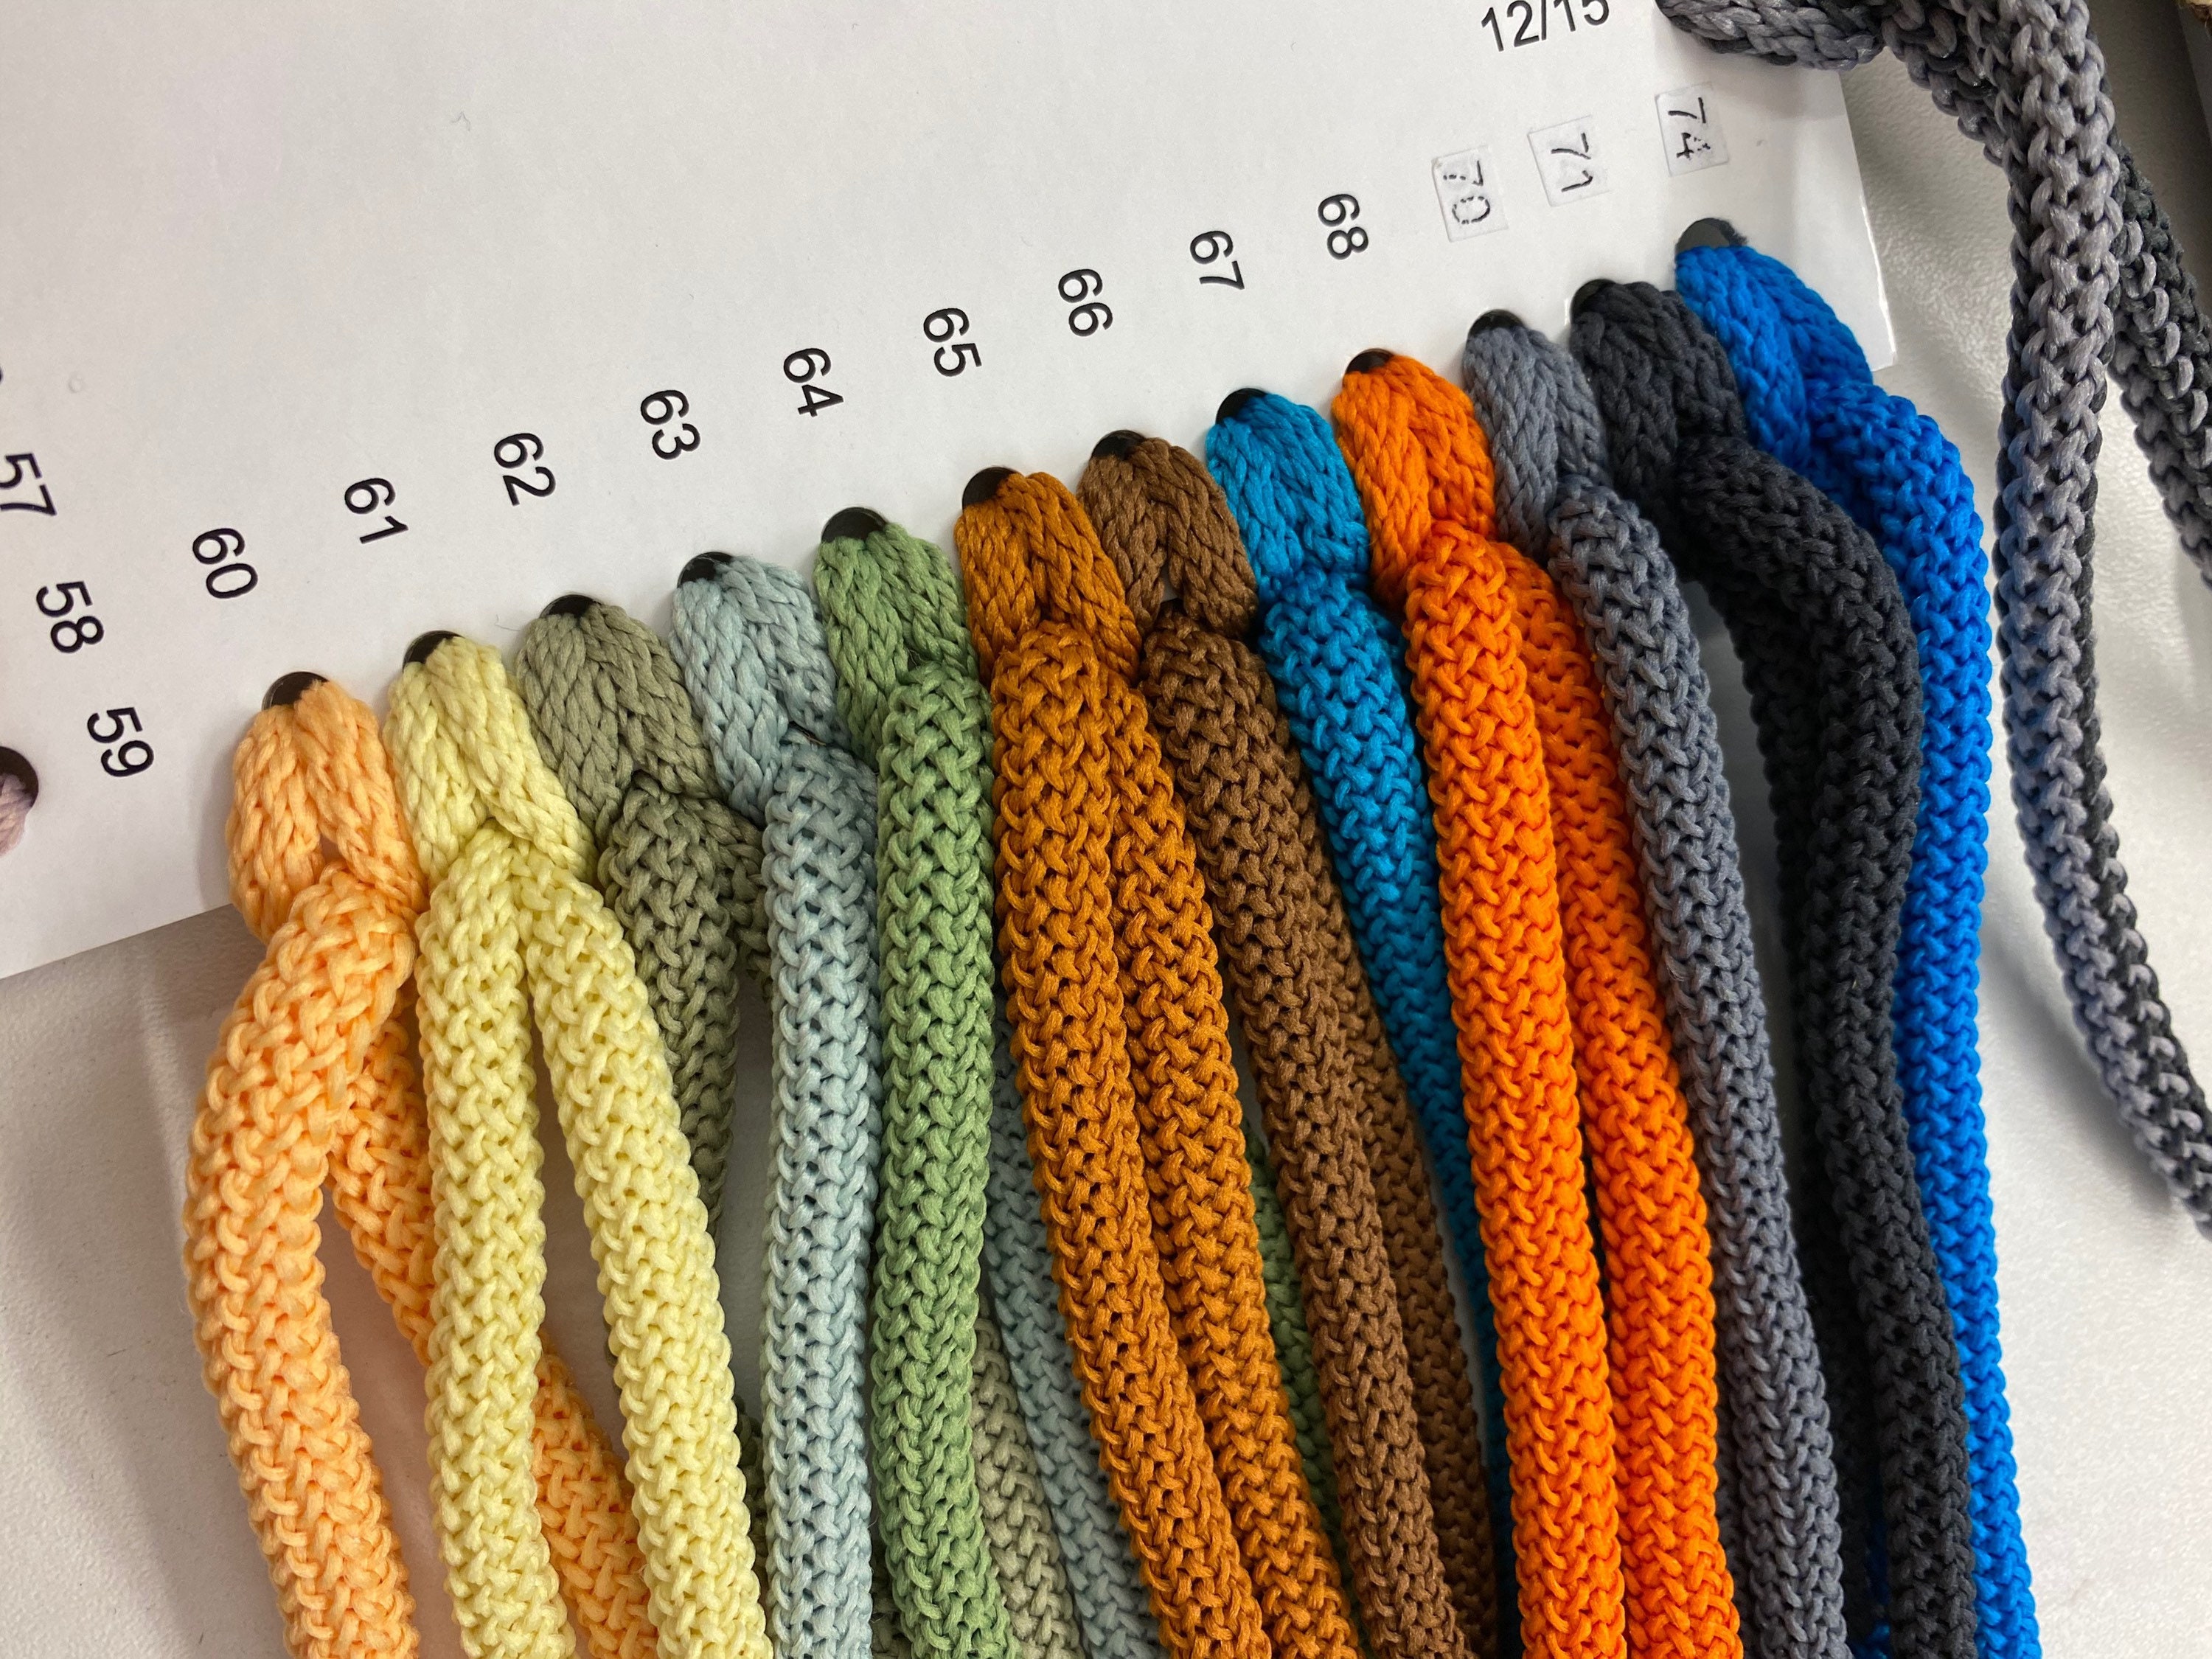 Polyester Rope, Colored Rope 6mm, Soft Cord Macrame, Strong Cord, Crochet  Yarn, Polyester Rope, Nylon Colored Cord, Craft Rope. 